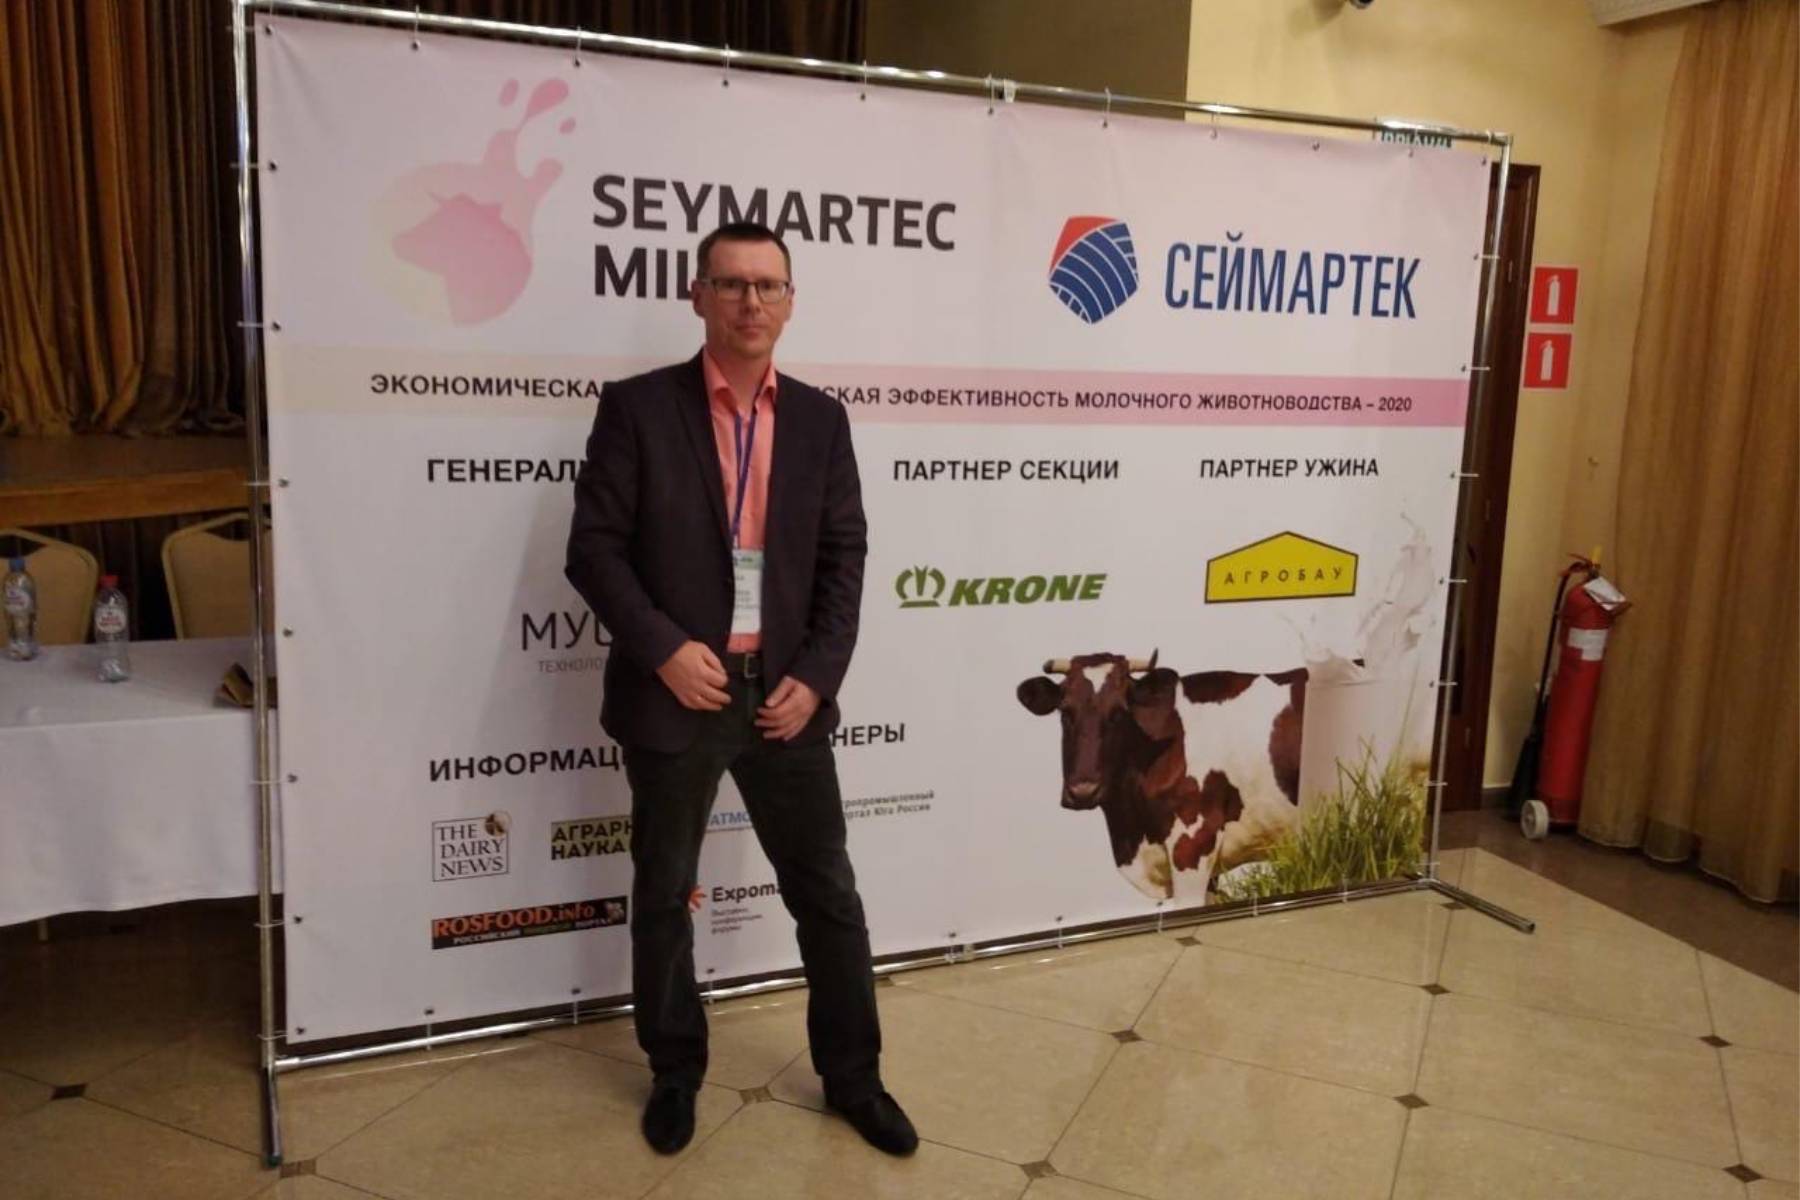 Results of the Forum "Economic and Technological Efficiency of Dairy Production - 2020" - Smart4Agro